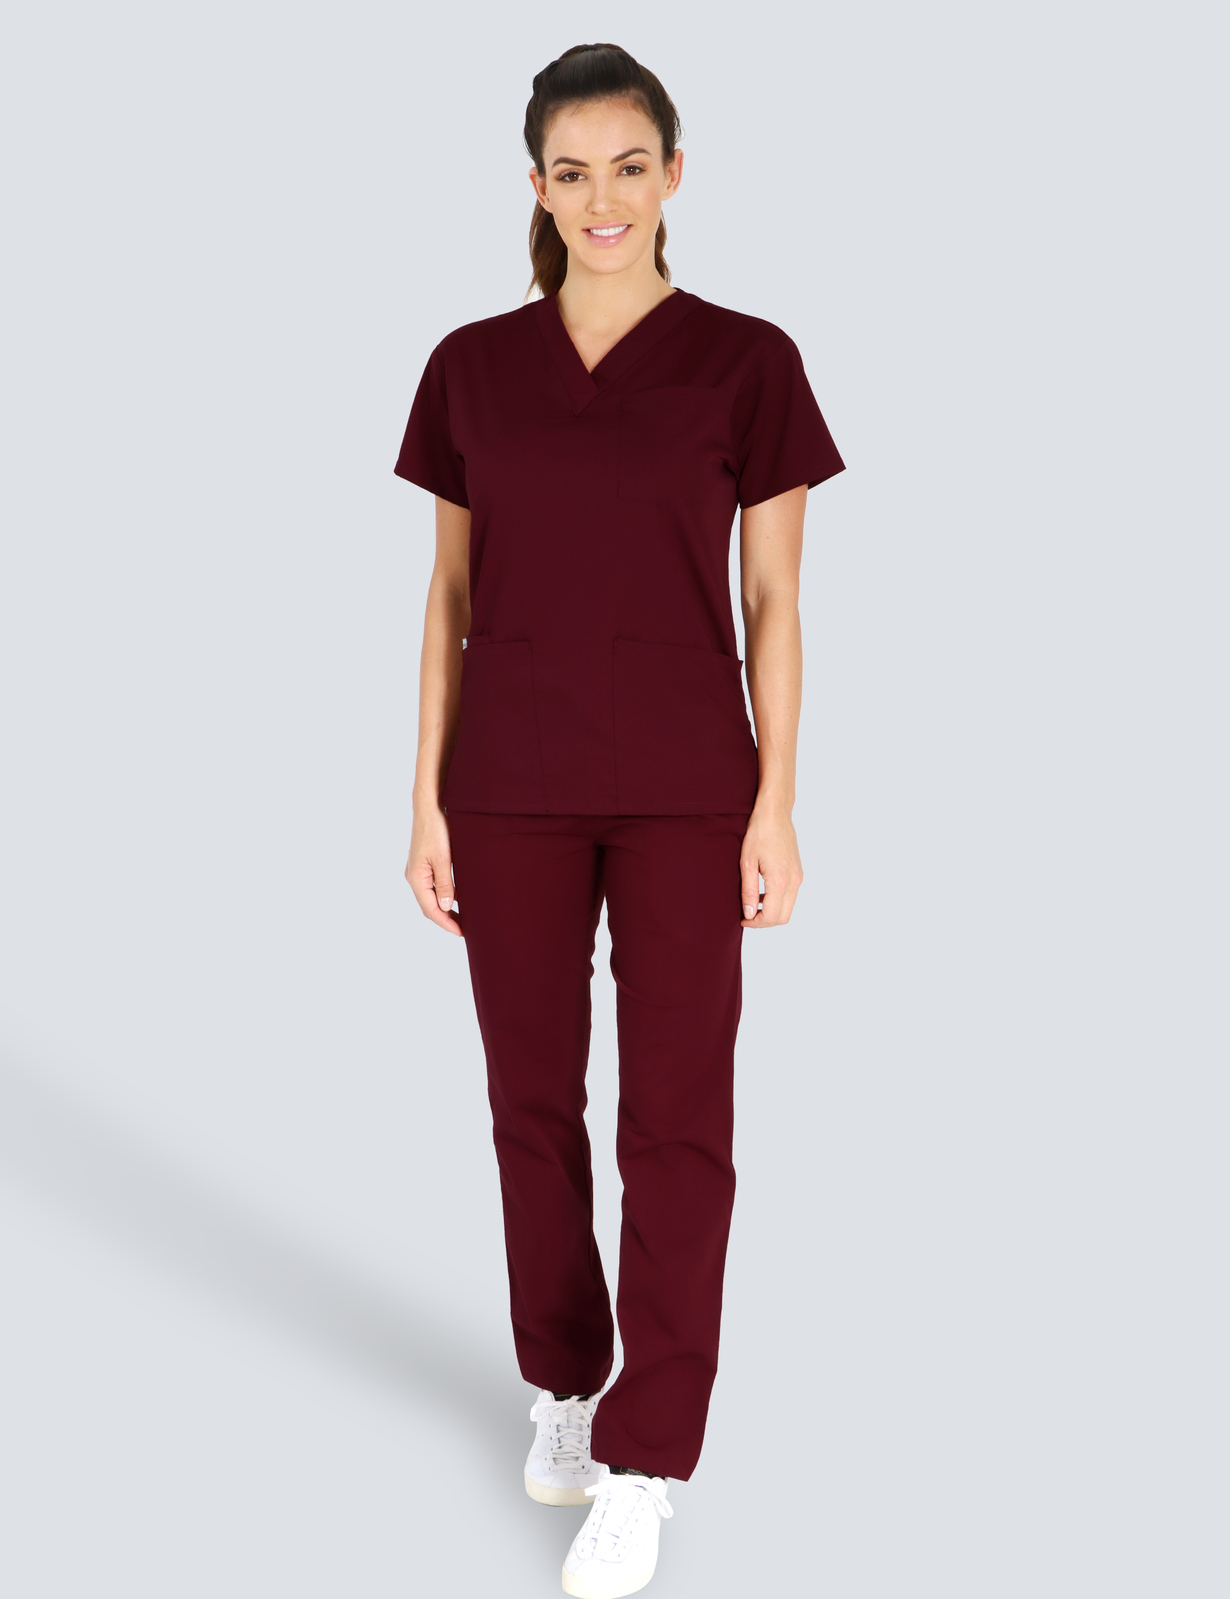 Redcliffe Hospital - ED CN (4 Pocket Scrub Top and Cargo Pants in Burgundy incl Logos)